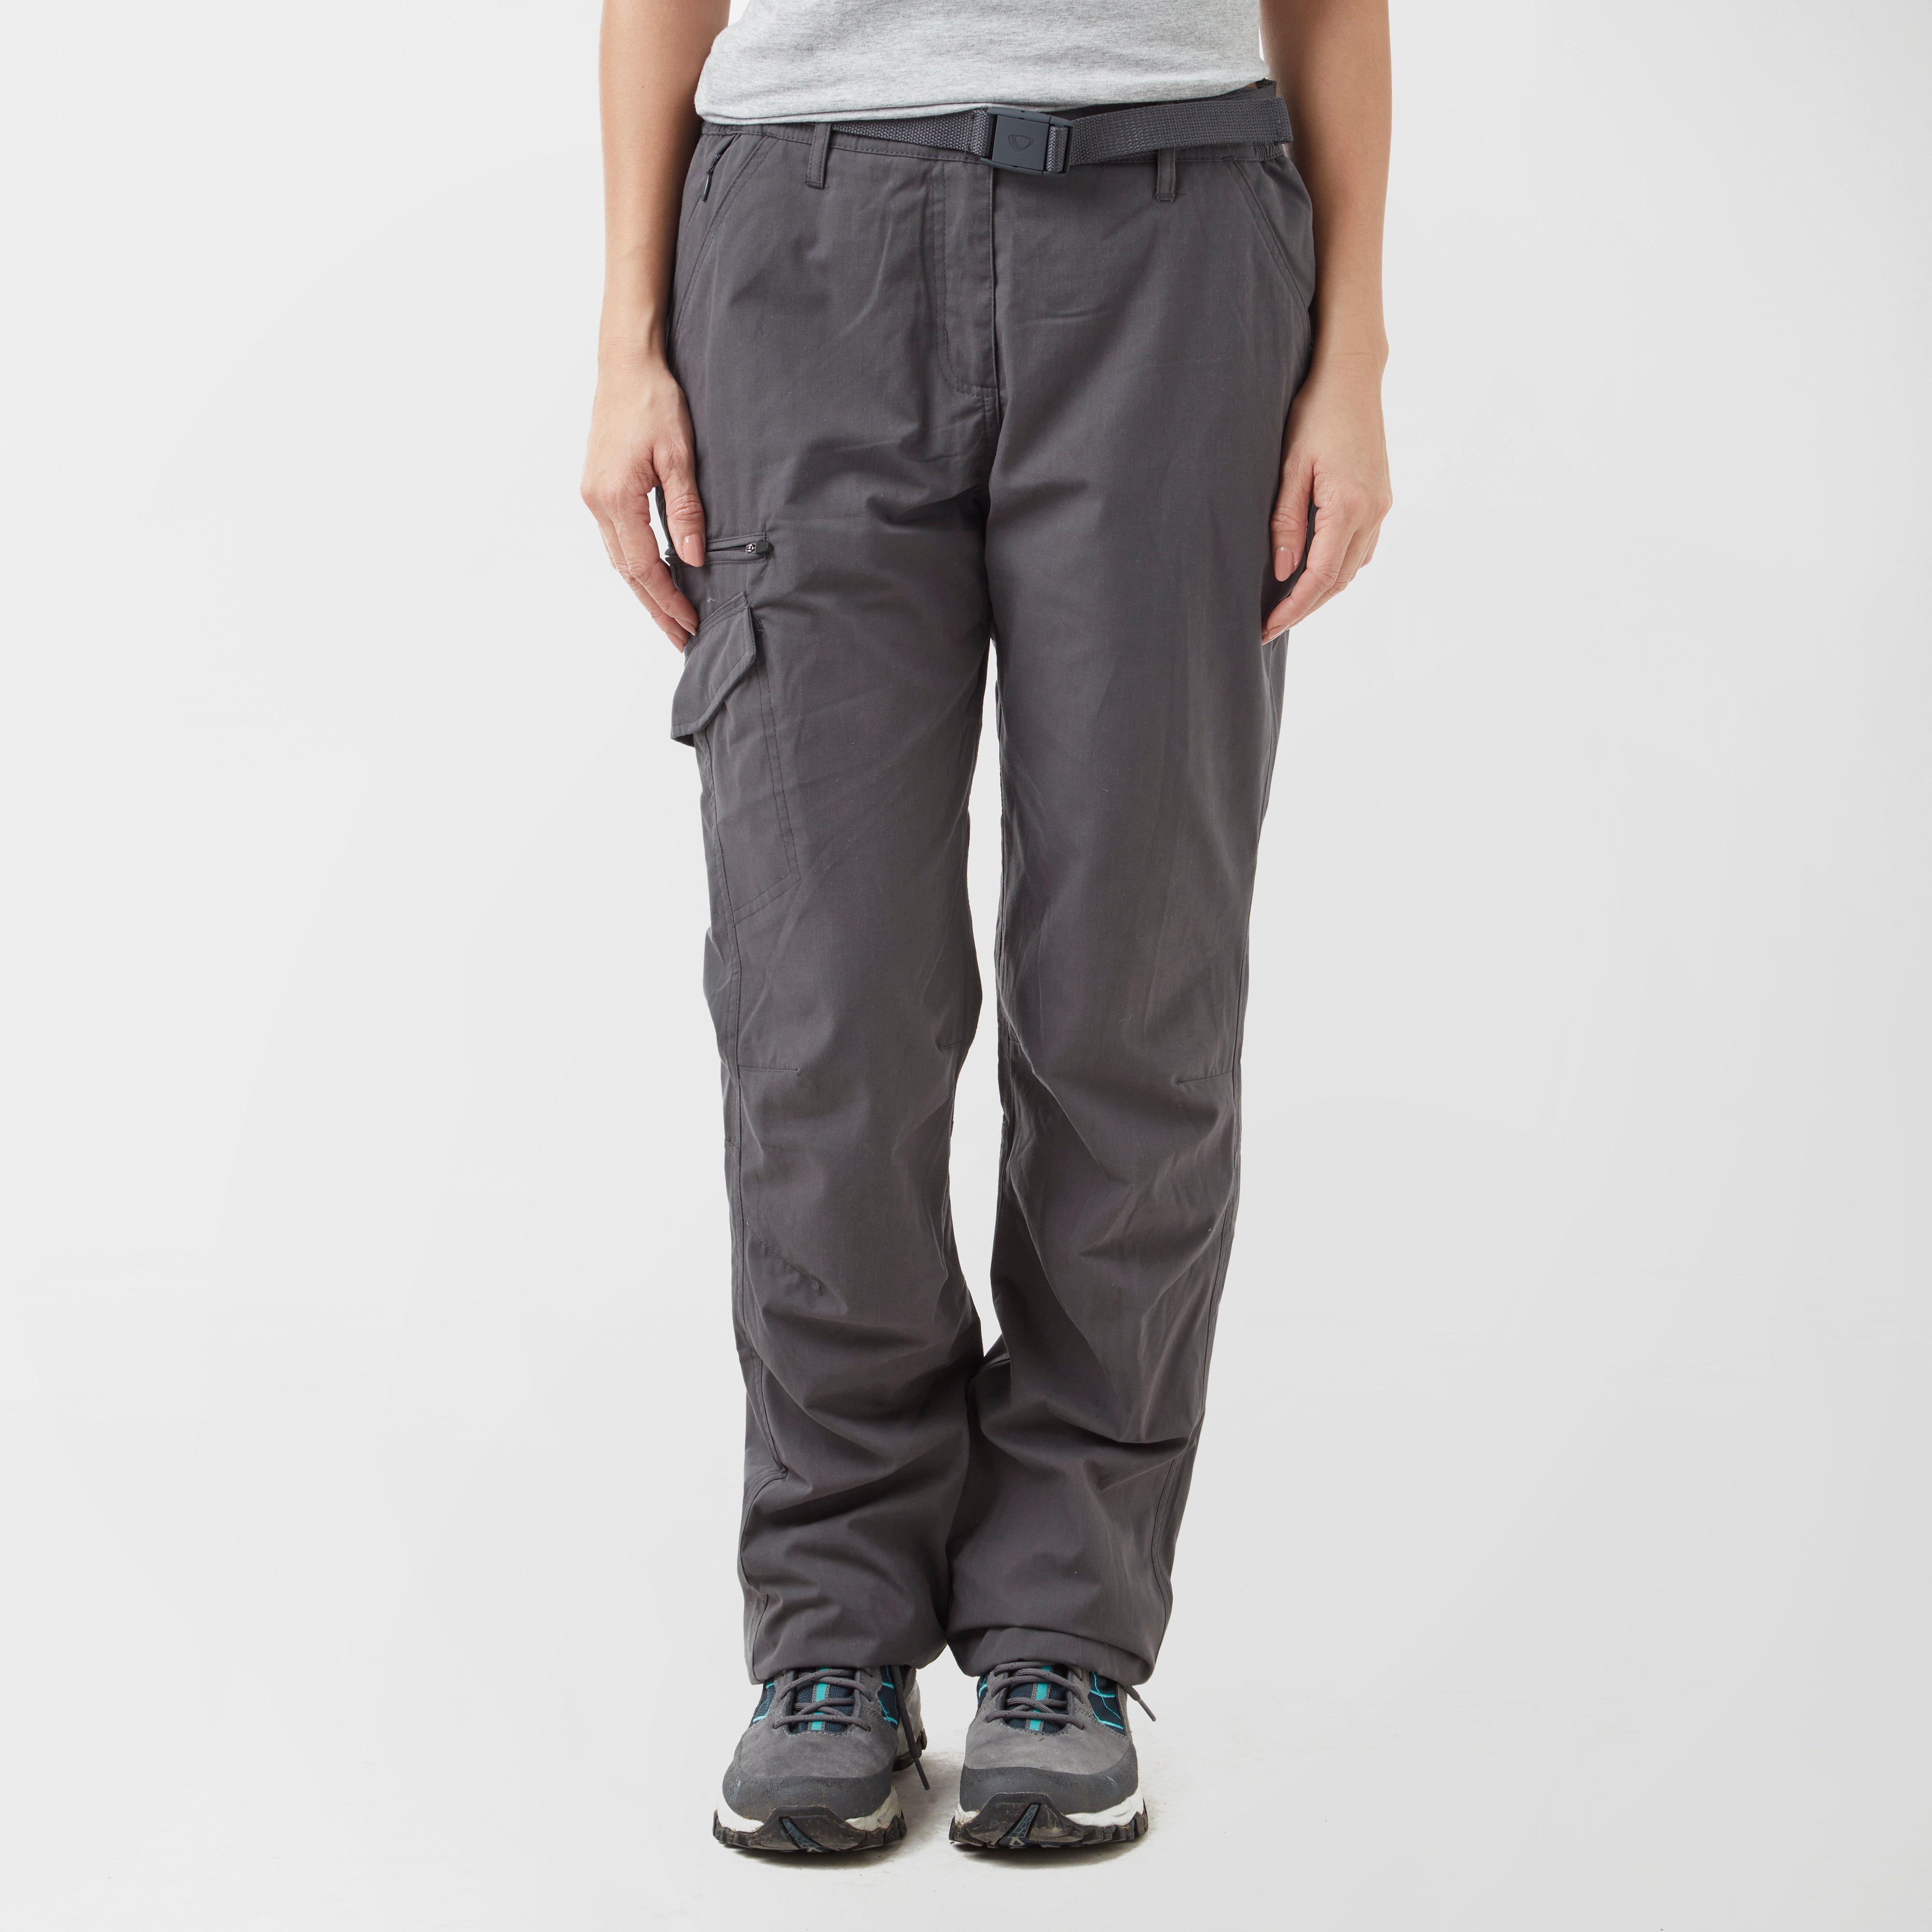 Brasher Womens Grisedale Thermal Trousers - Grey/gry  Grey/gry